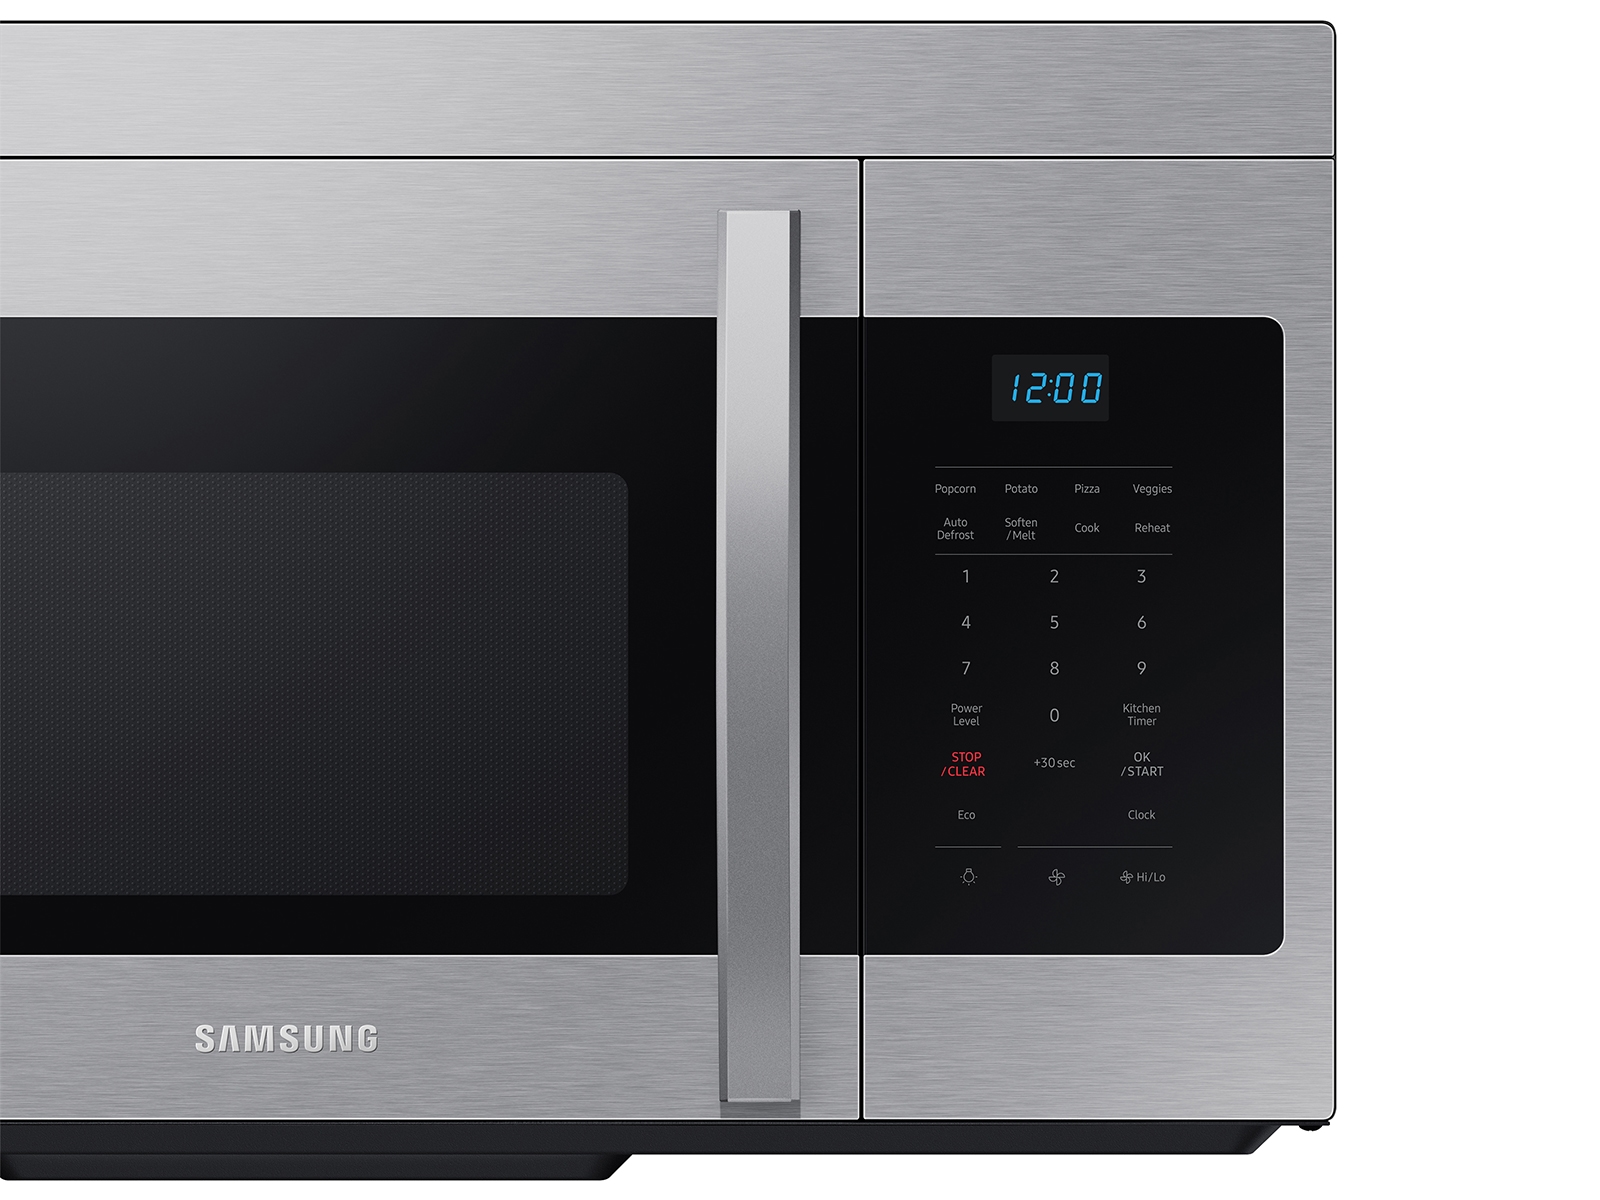 https://image-us.samsung.com/SamsungUS/home/home-appliances/microwaves/all/pdp/06242021/stainless/ME16A4021AS_06_Silver_SCOM.jpg?$product-details-jpg$